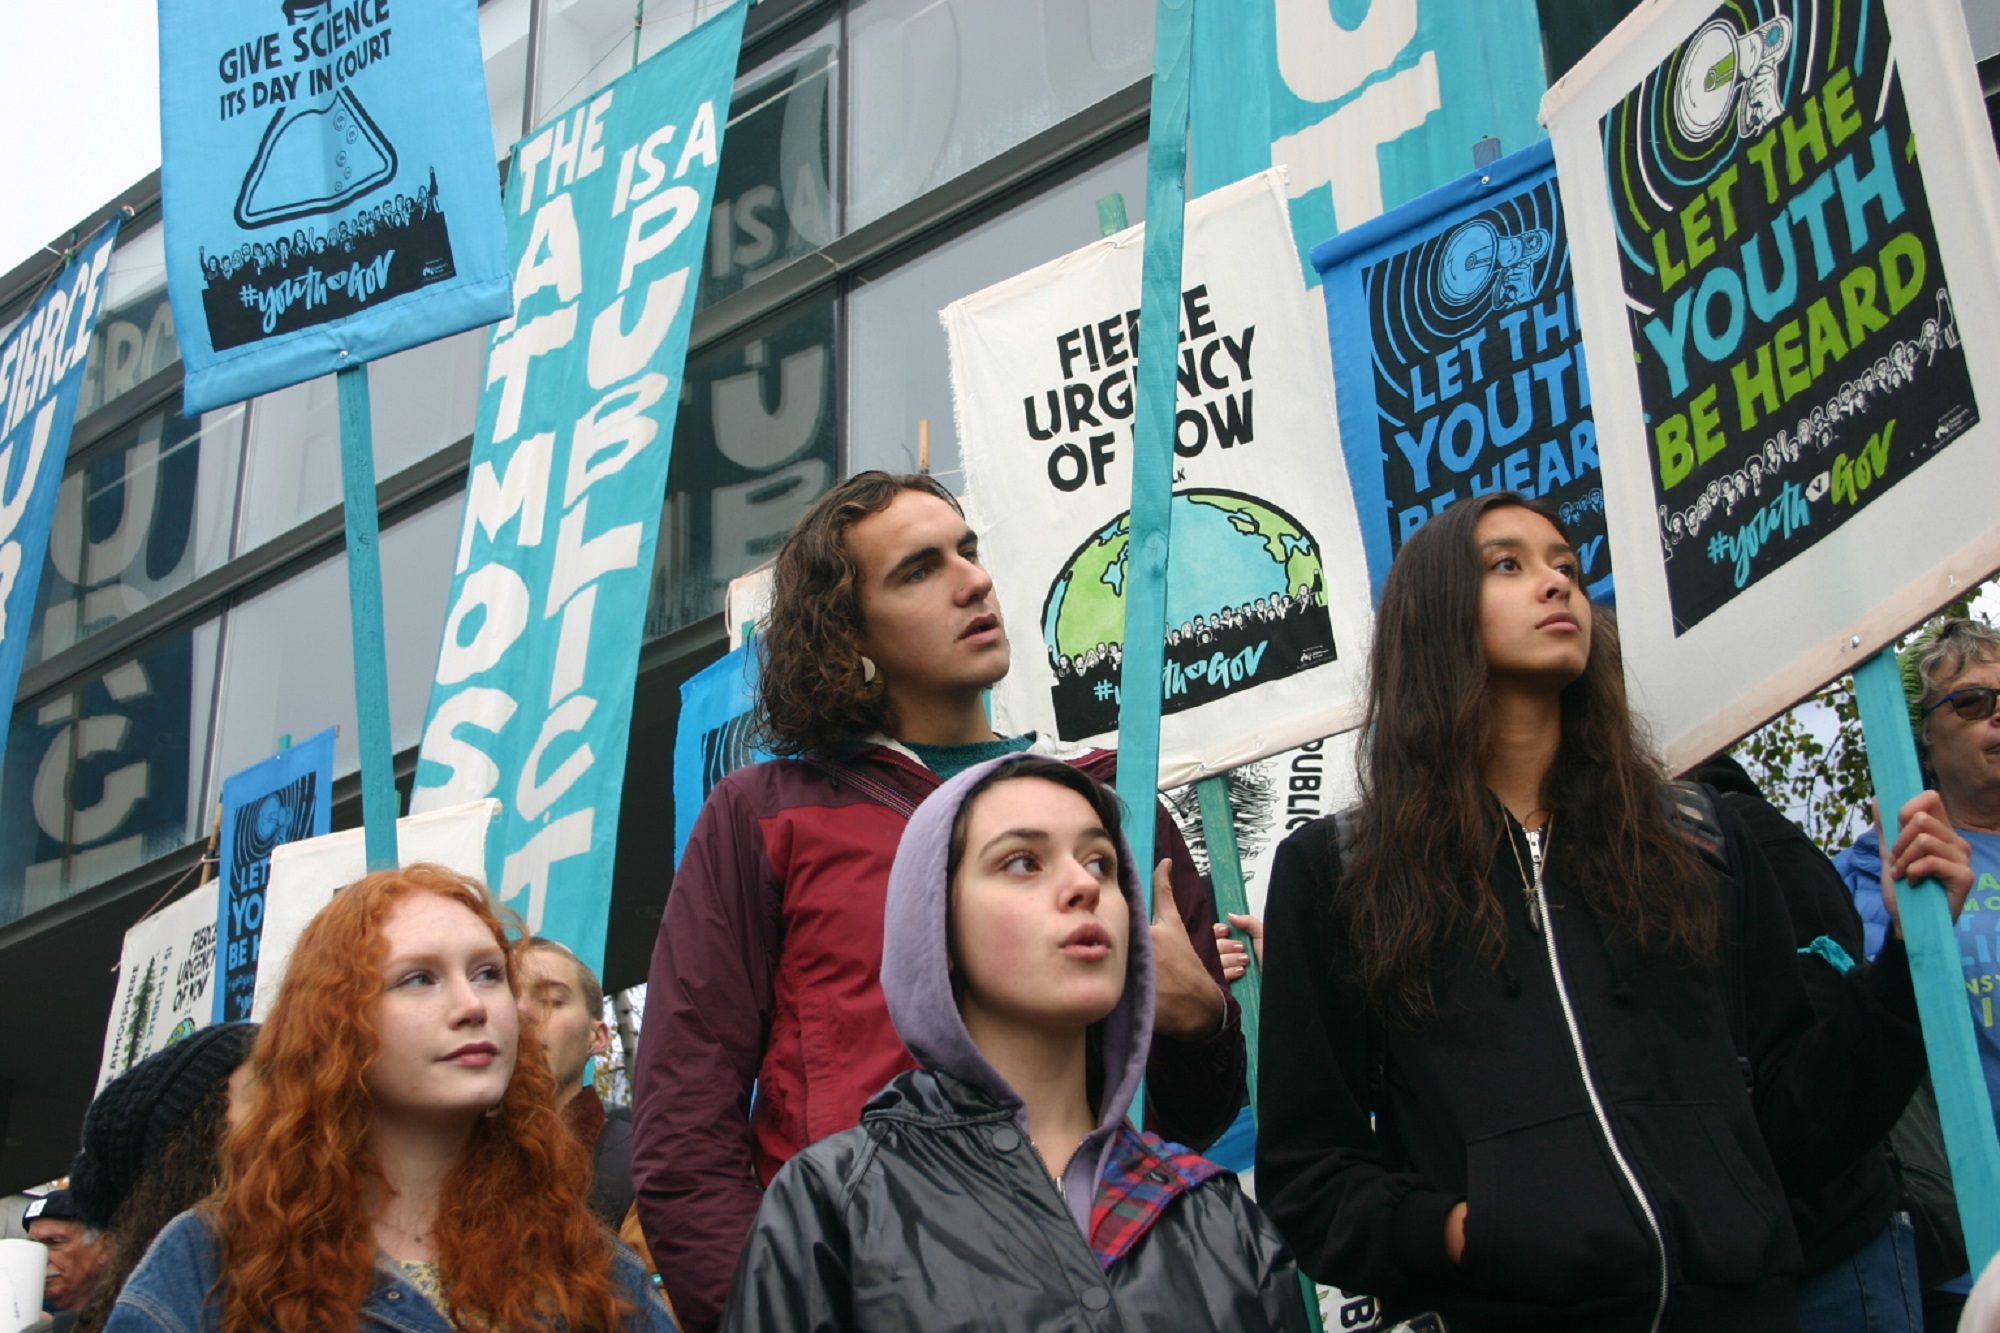 Students at a climate rally holding blue environmentalism signs on a cloudy day